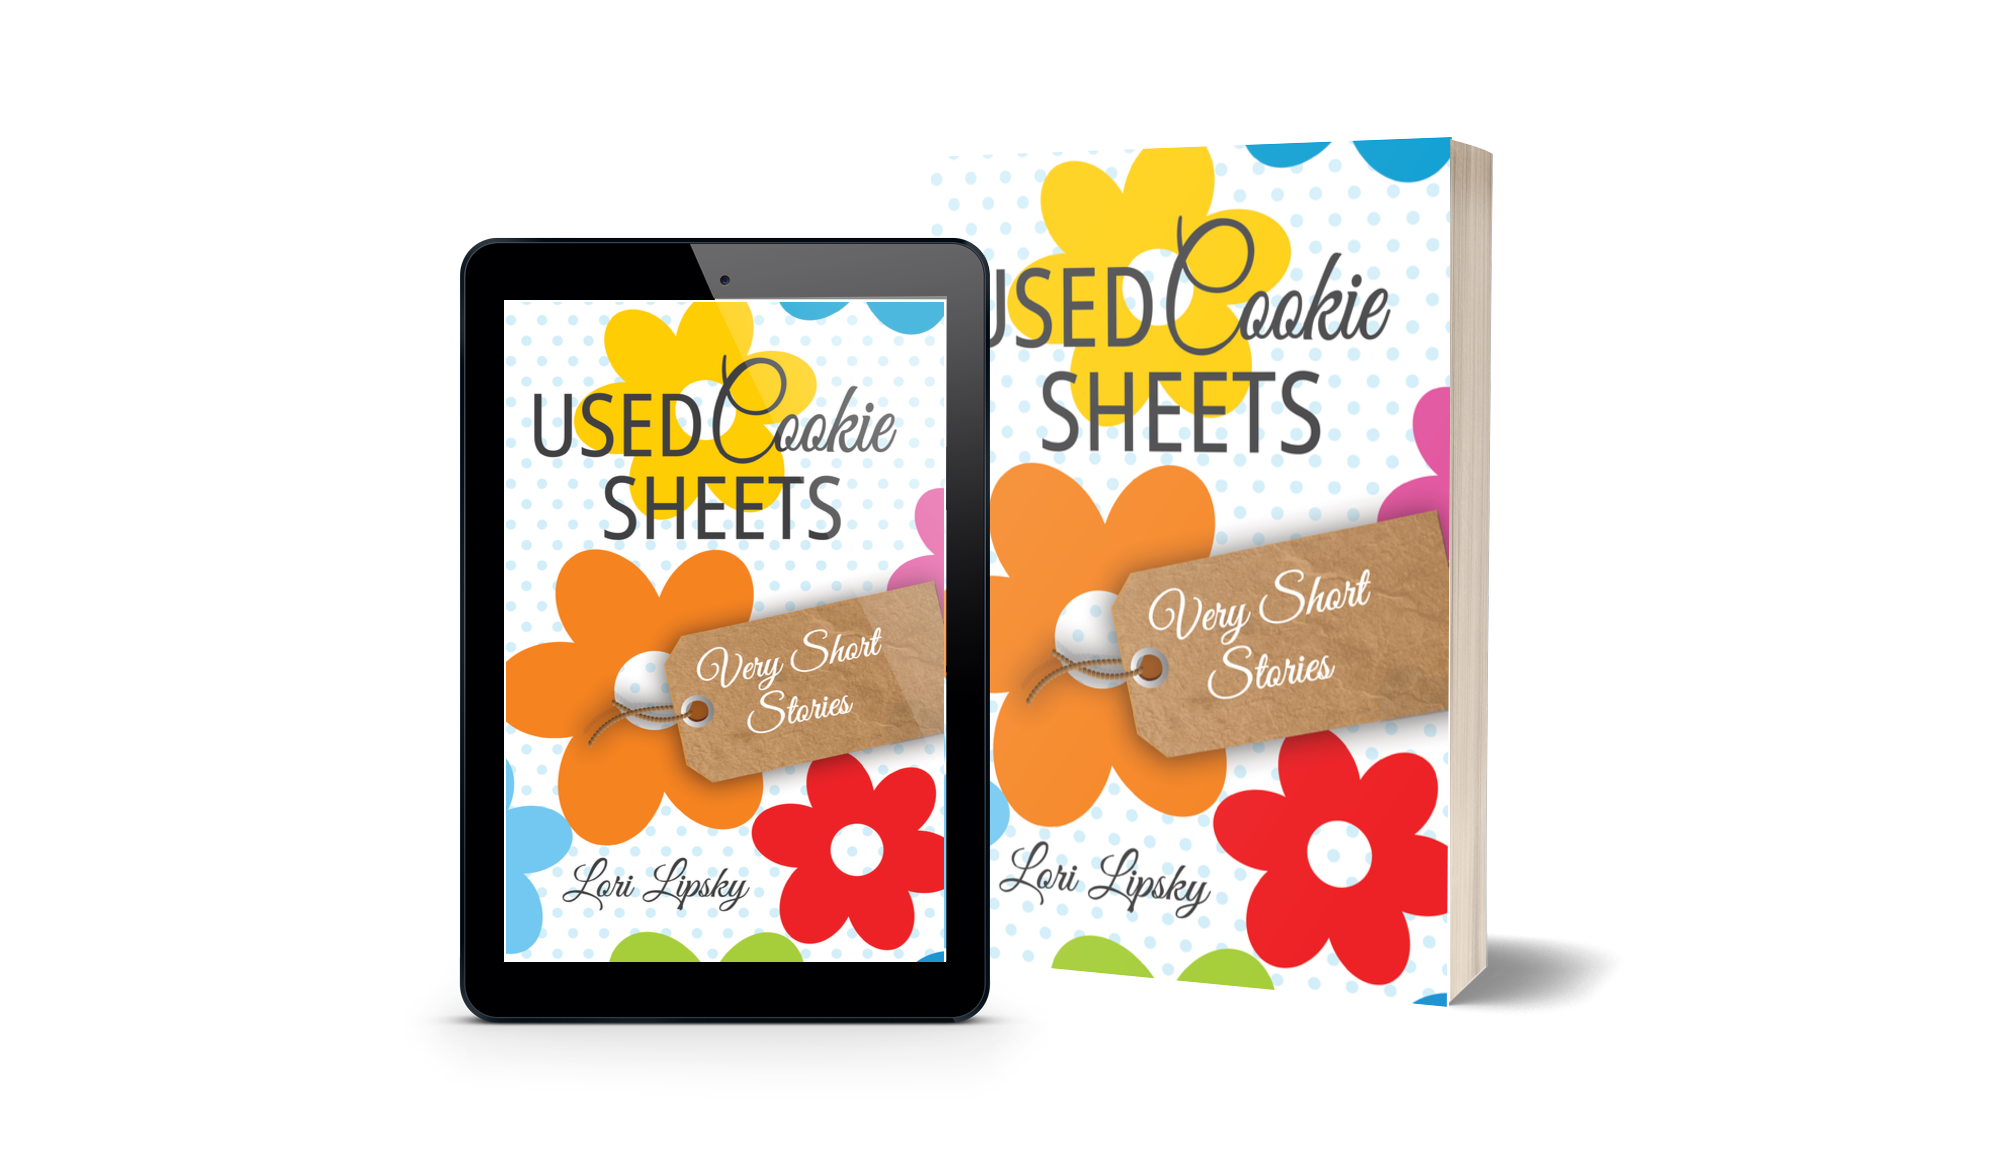 Used Cookie Sheets is a collection of 45 Tiny Tales written by Lori Lipsky.